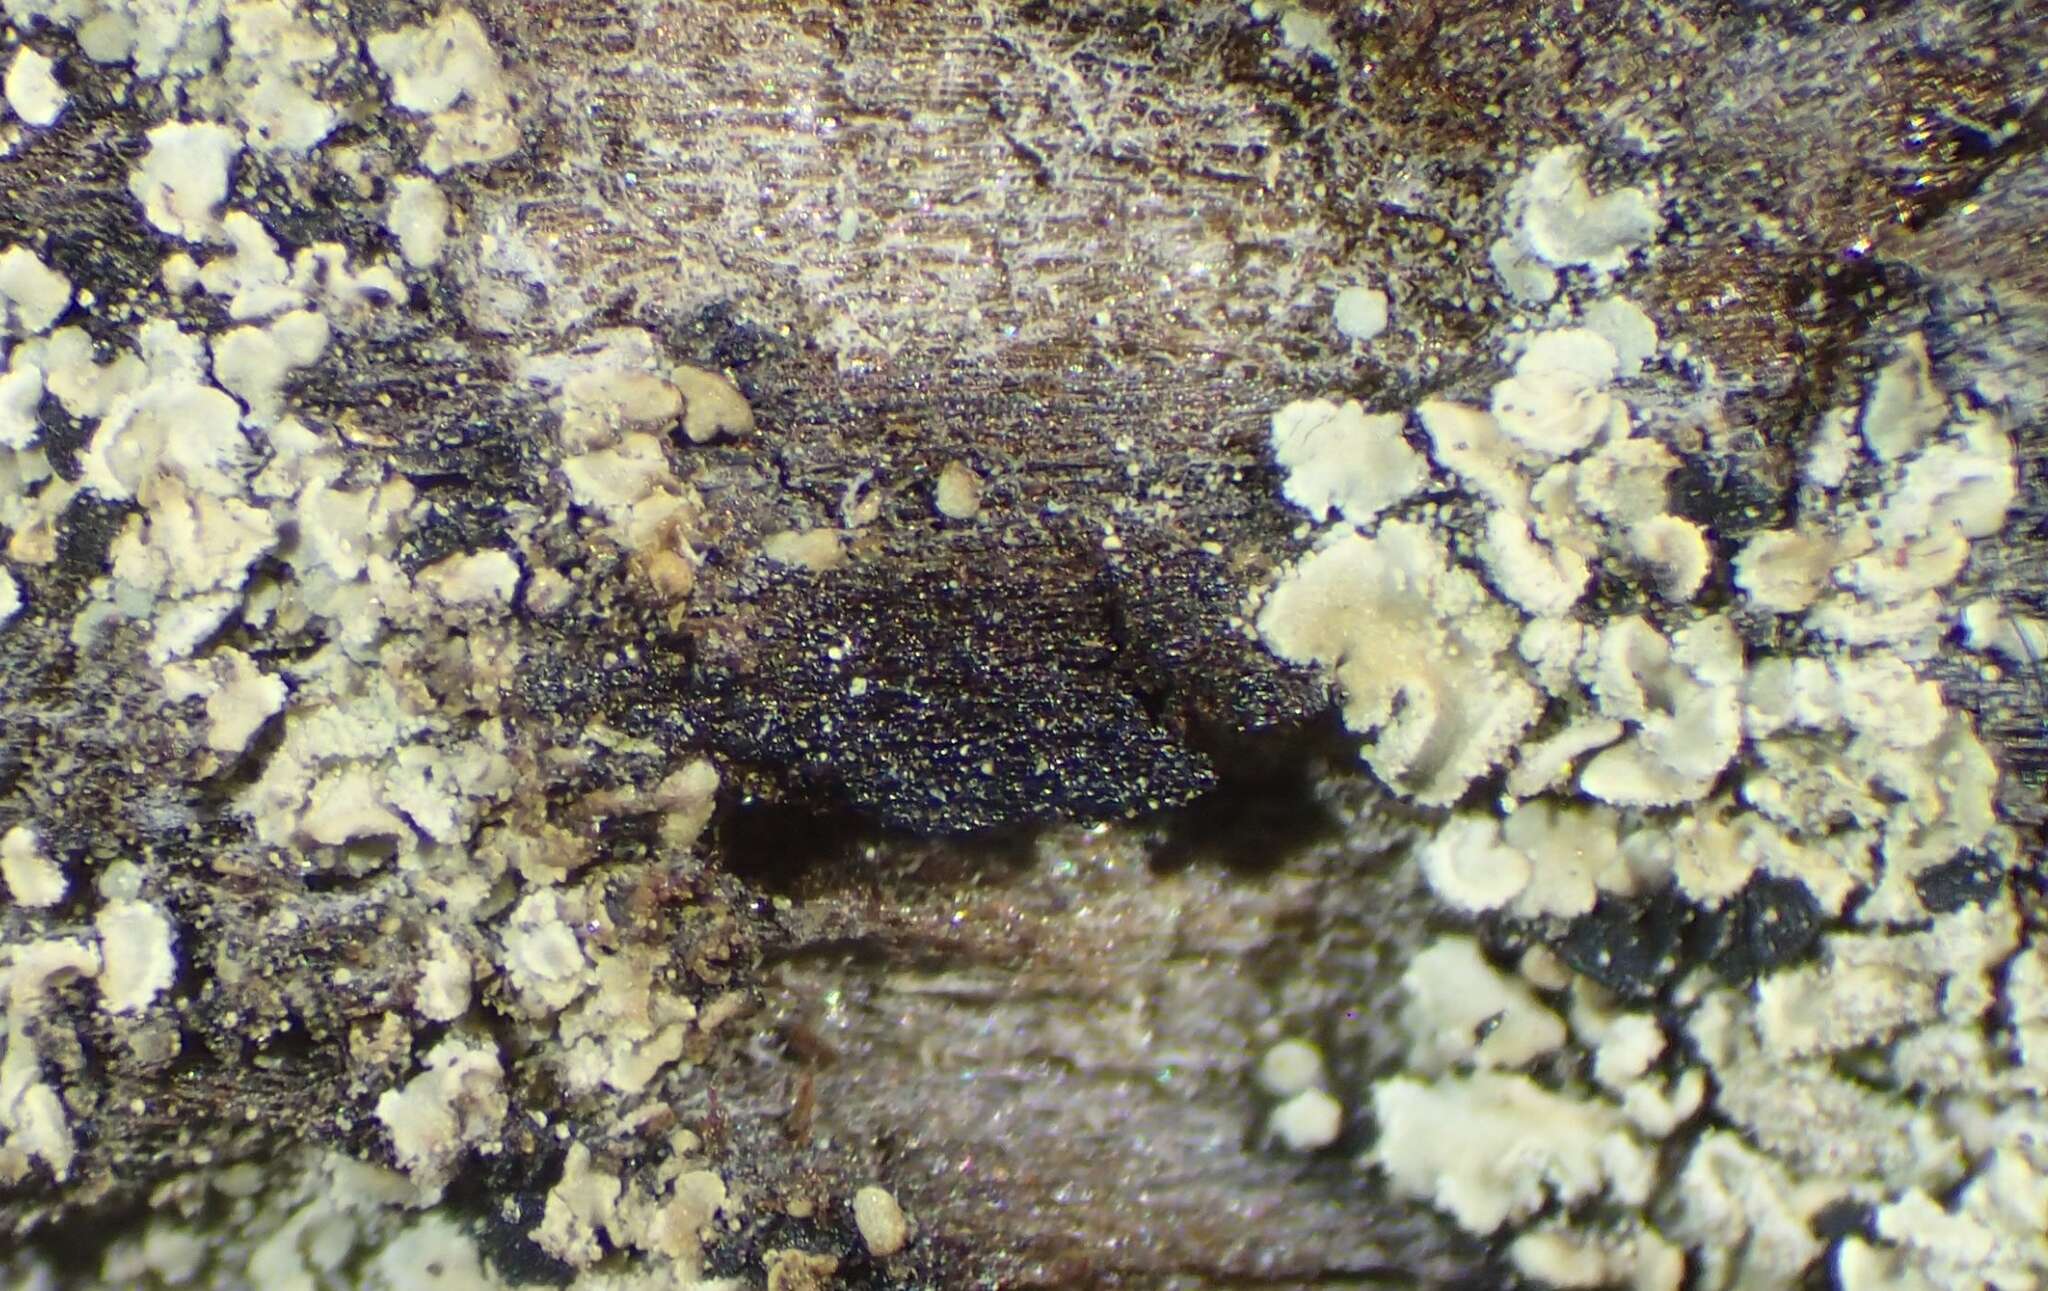 Image of cockleshell lichen